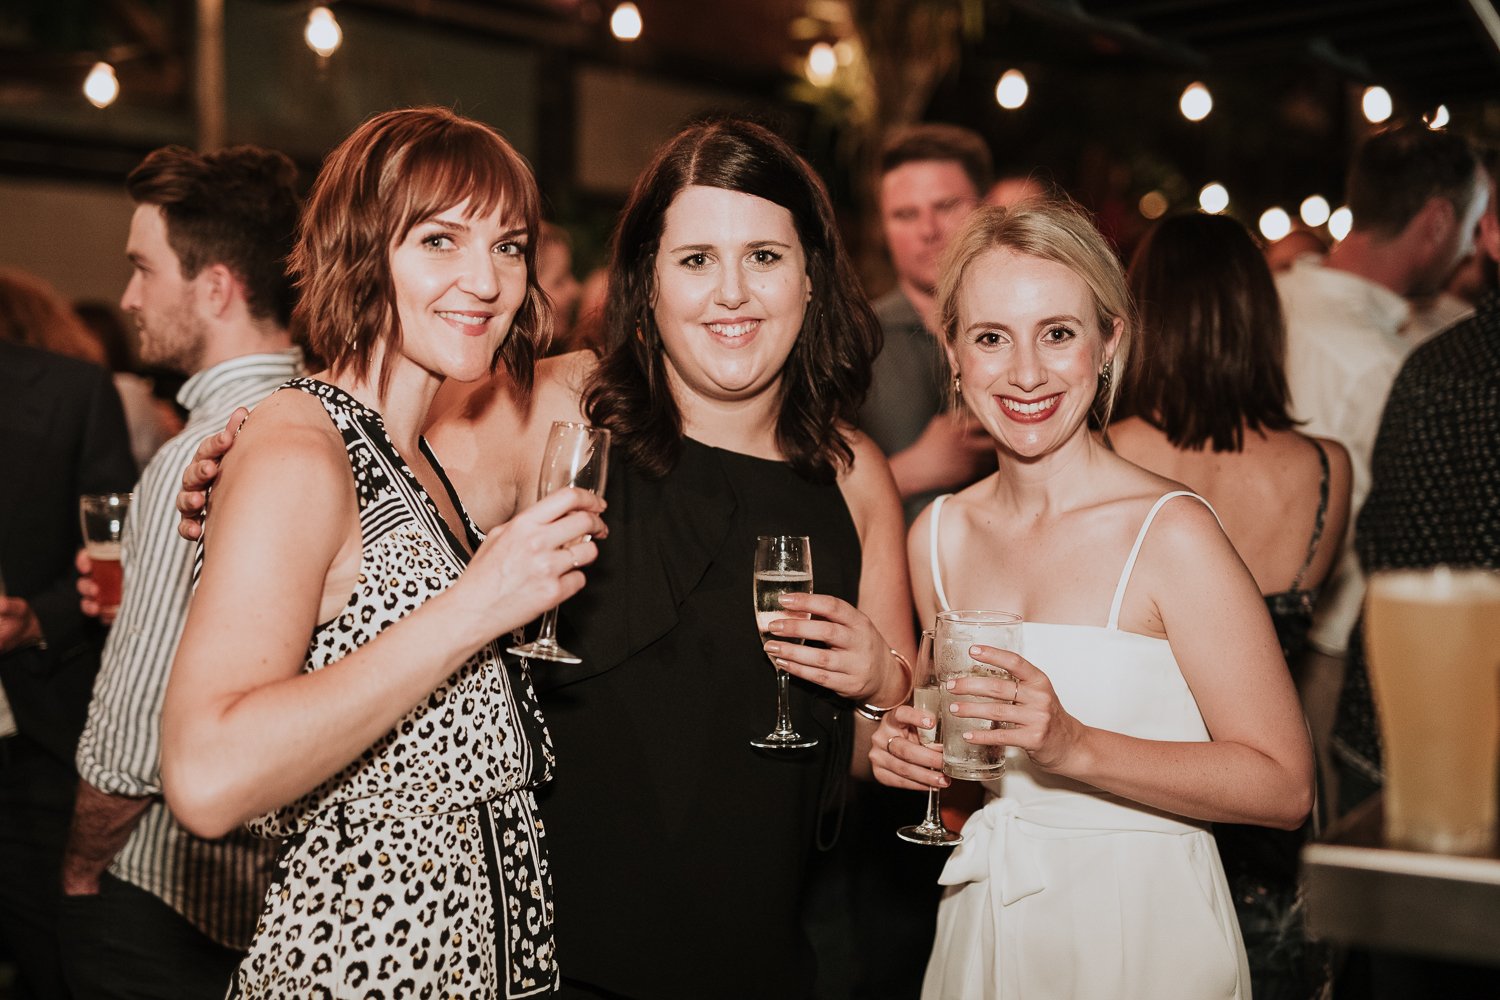 The Triffid Corporate Event Photography Brisbane (77 of 77).jpg